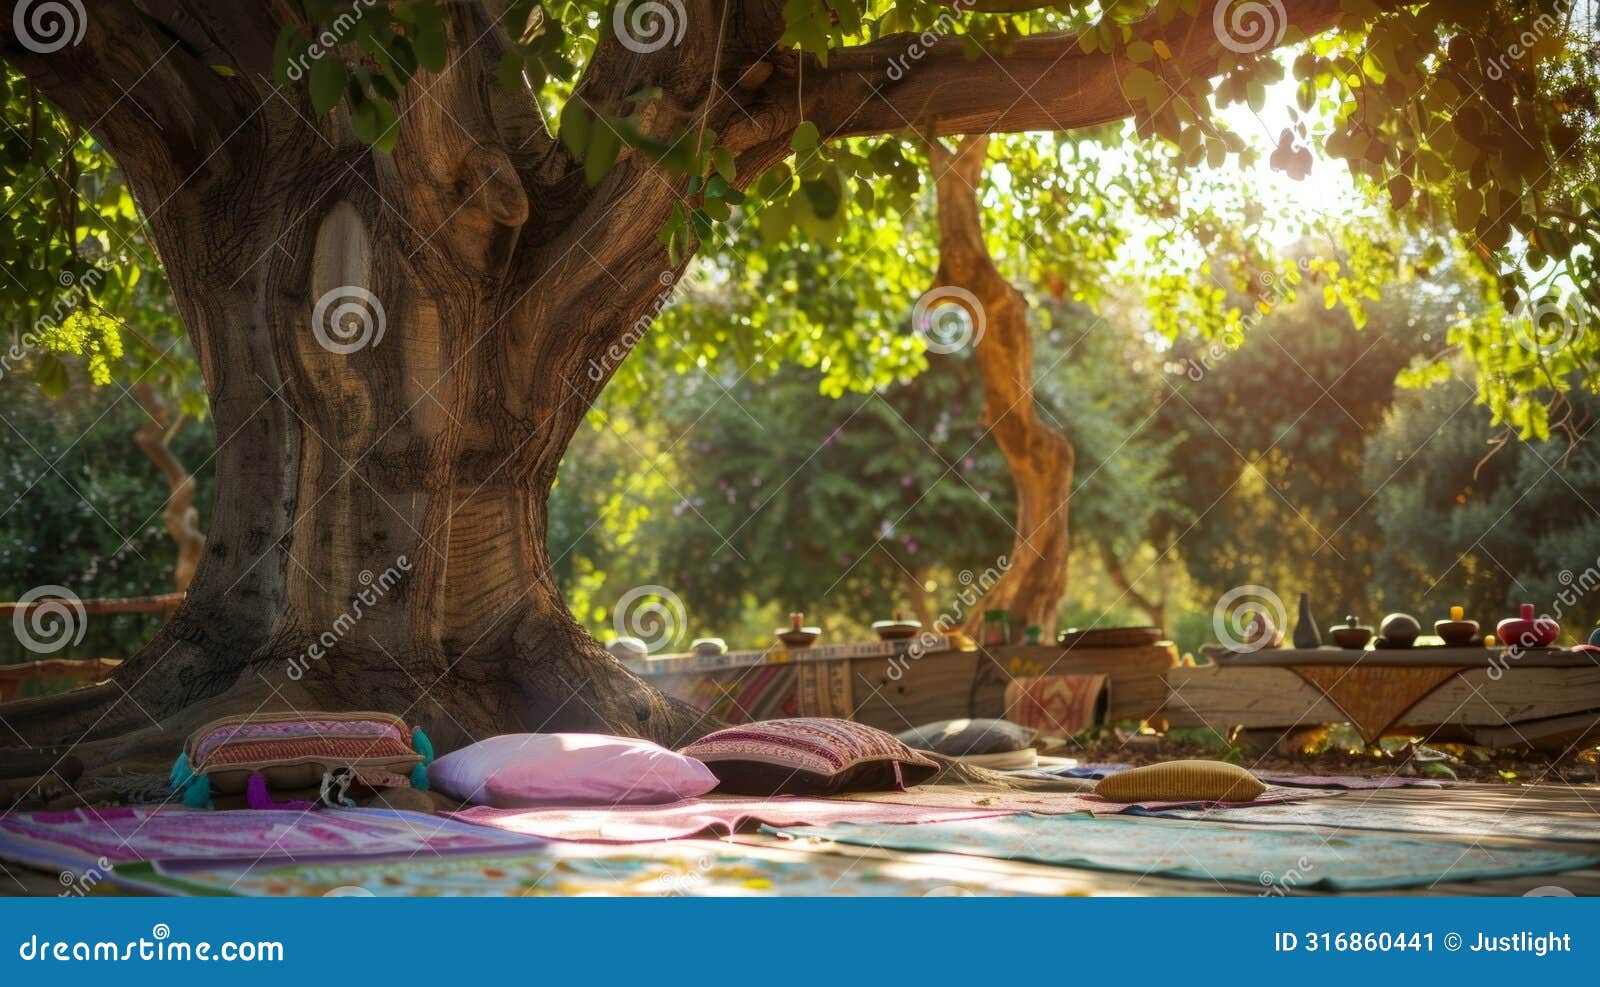 a meditation session taking place under a large tree surrounded by uplifting messages and positive affirmations